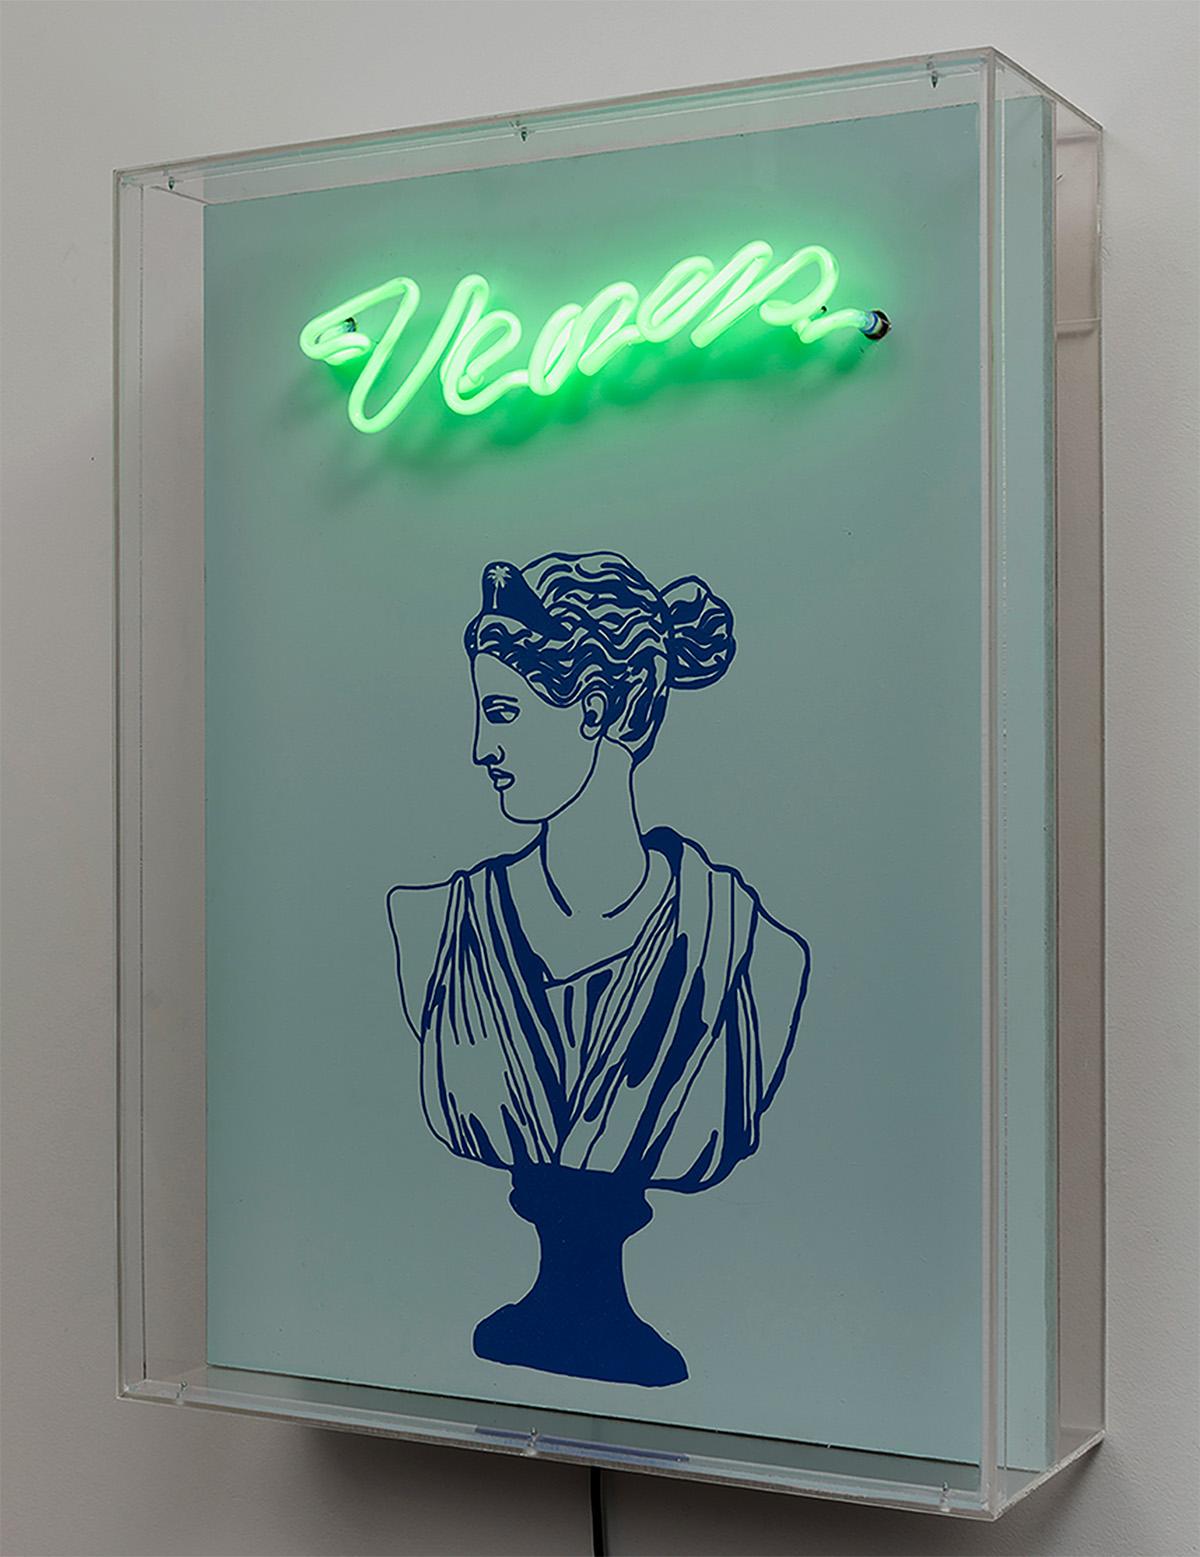 Modern Venus. Neon Light Box Wall Sculpture. From the series Neon Classics For Sale